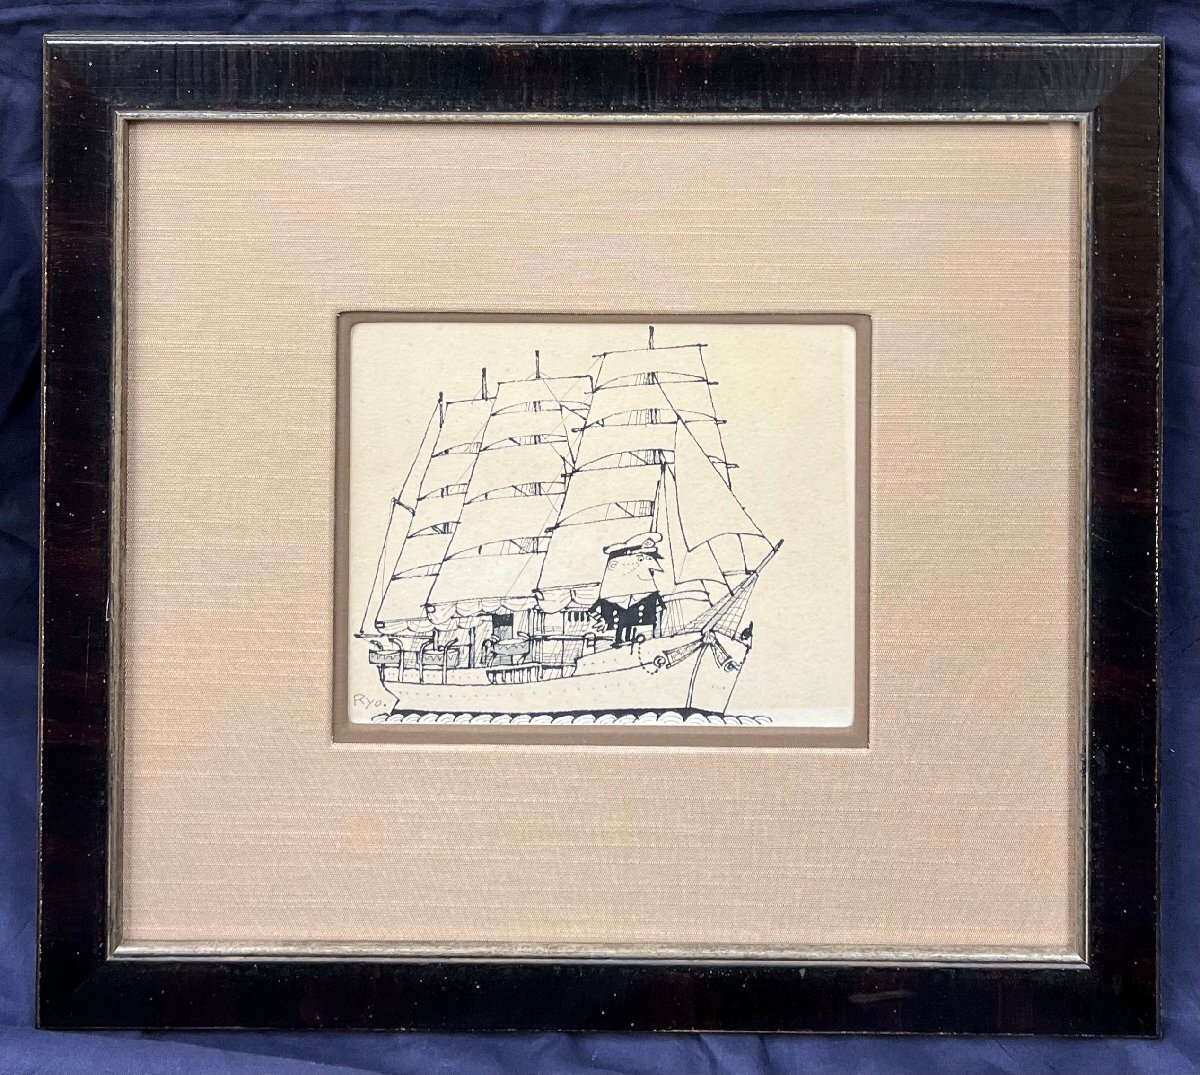 Ryohei Yanagihara Nippon Maru pen drawing, size 0-1, 1976, framed, guaranteed to be authentic [Very valuable hand-drawn work, known for his Torys advertising designs and ship drawings, spent his time in Yokohama], Artwork, Painting, Portraits